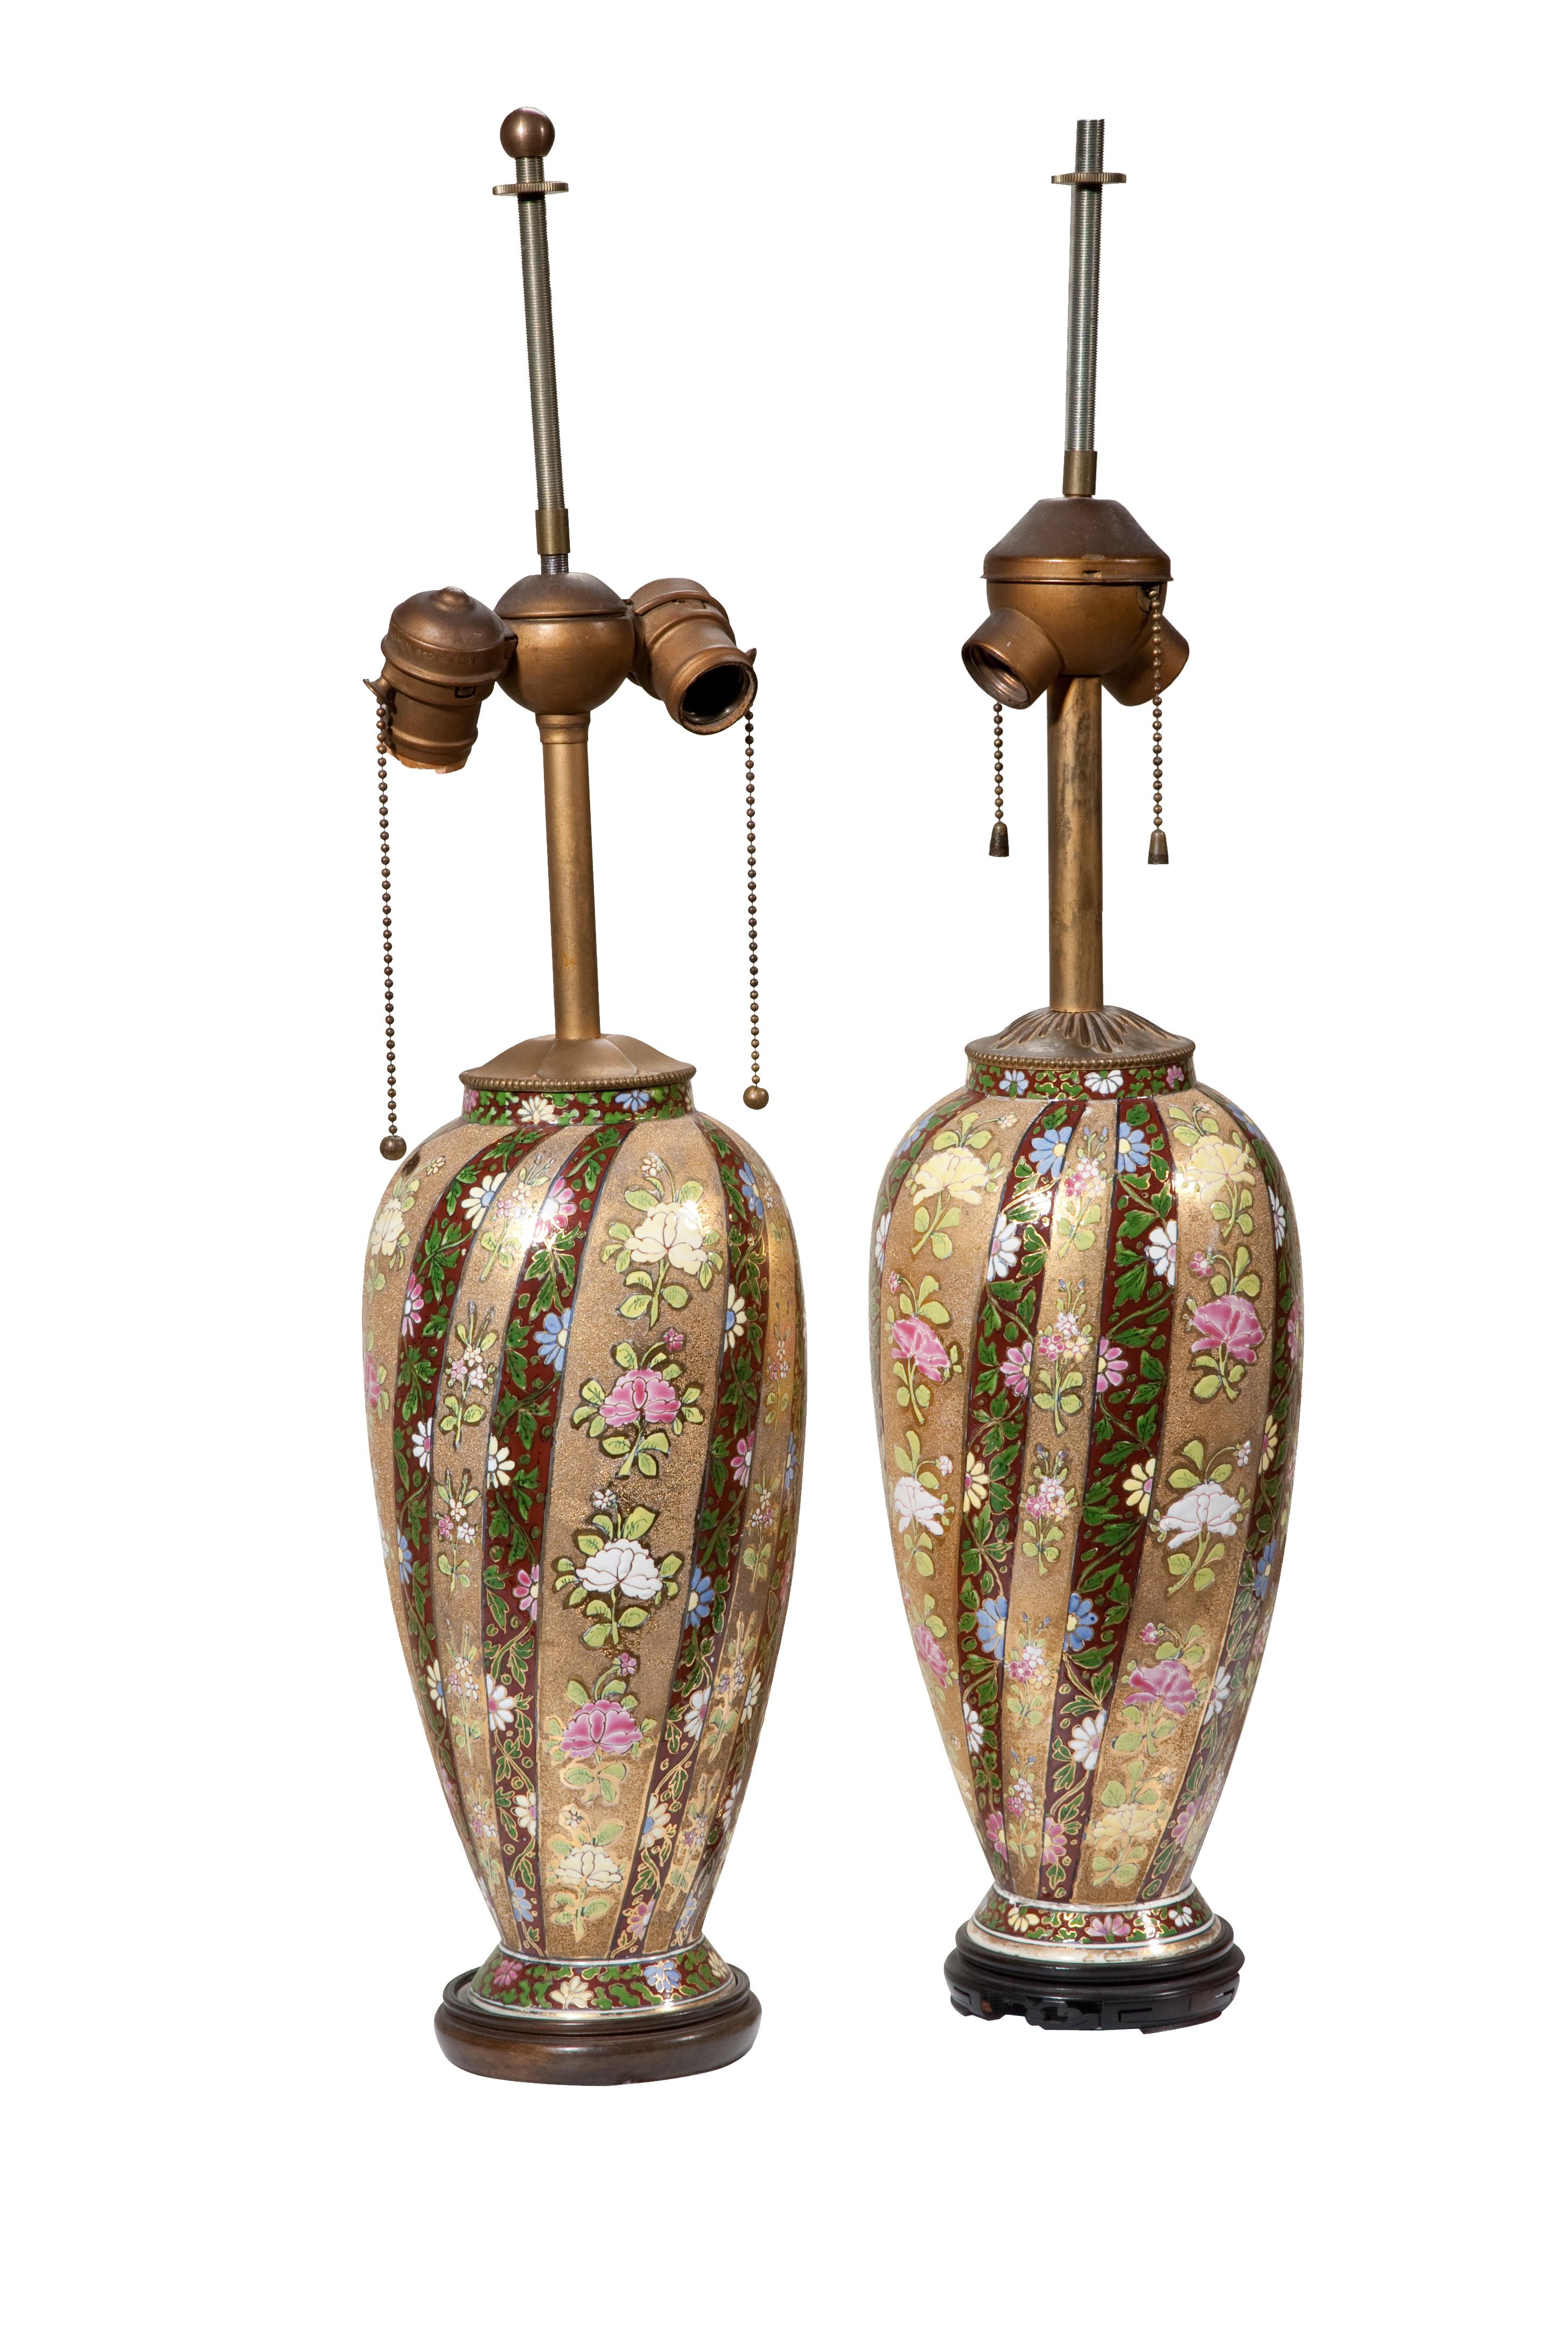 Enameled Pair of Art Nouveau Lamps by the Fischer Hungarian Porcelain Factory